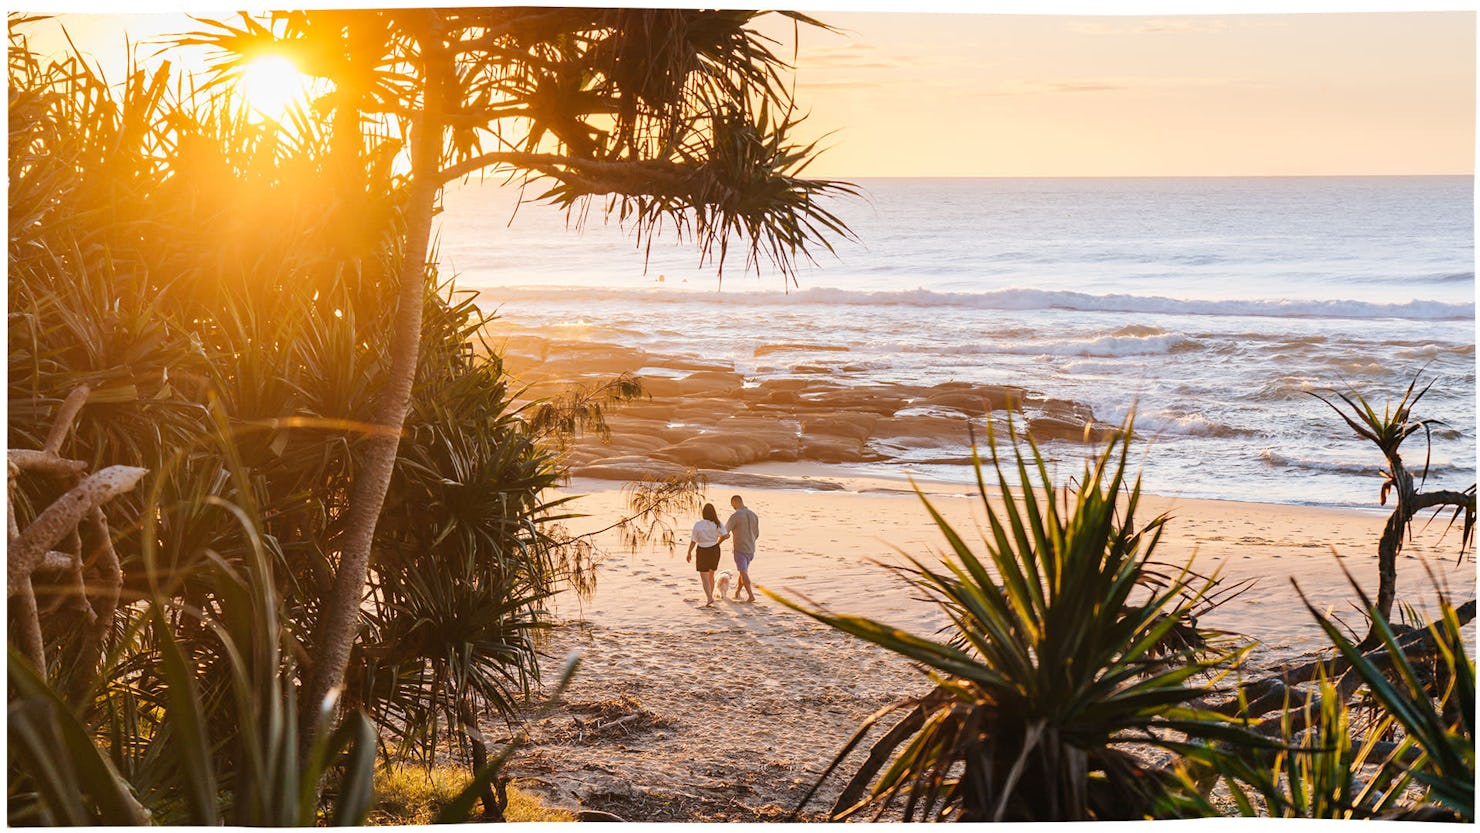 Chase an endless summer here on the Sunshine Coast